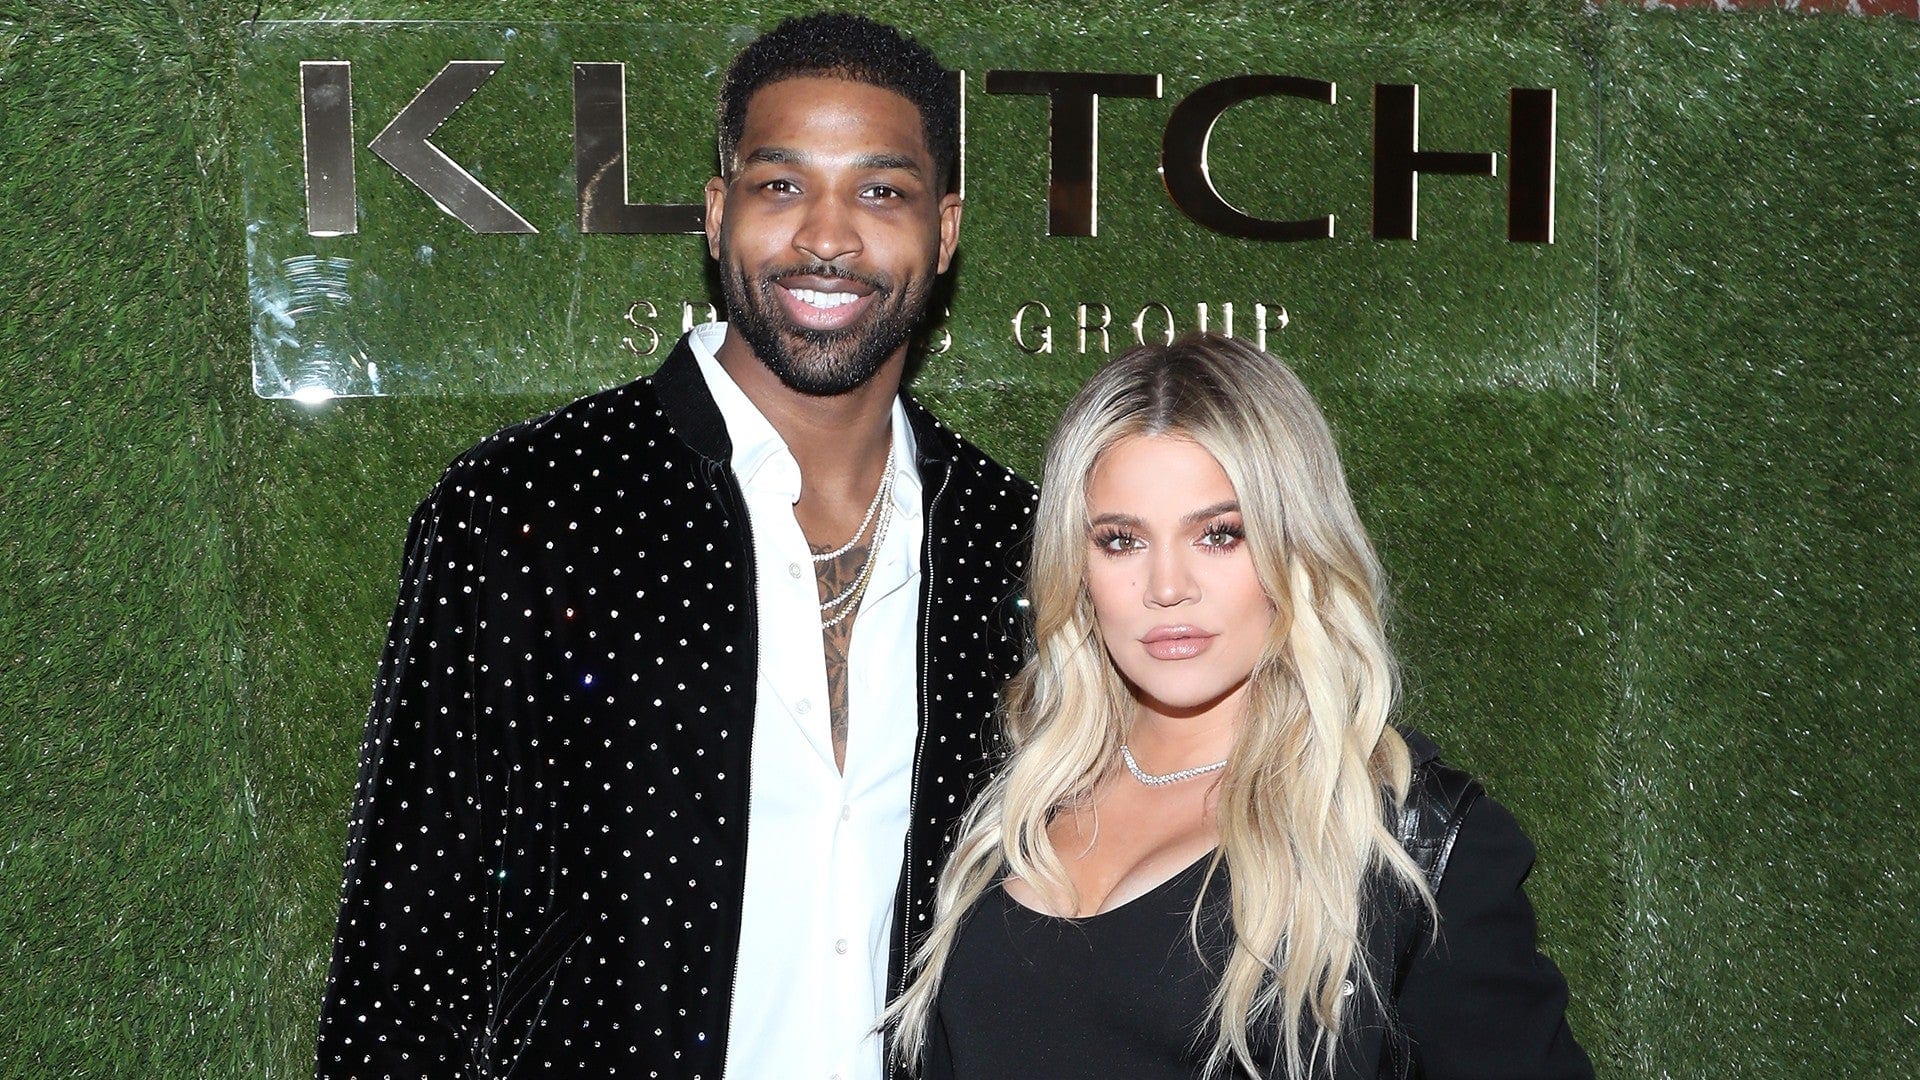 Khloé Kardashian Confirms She Is Not Engaged To Tristan Thompson In Spite Of Rumors